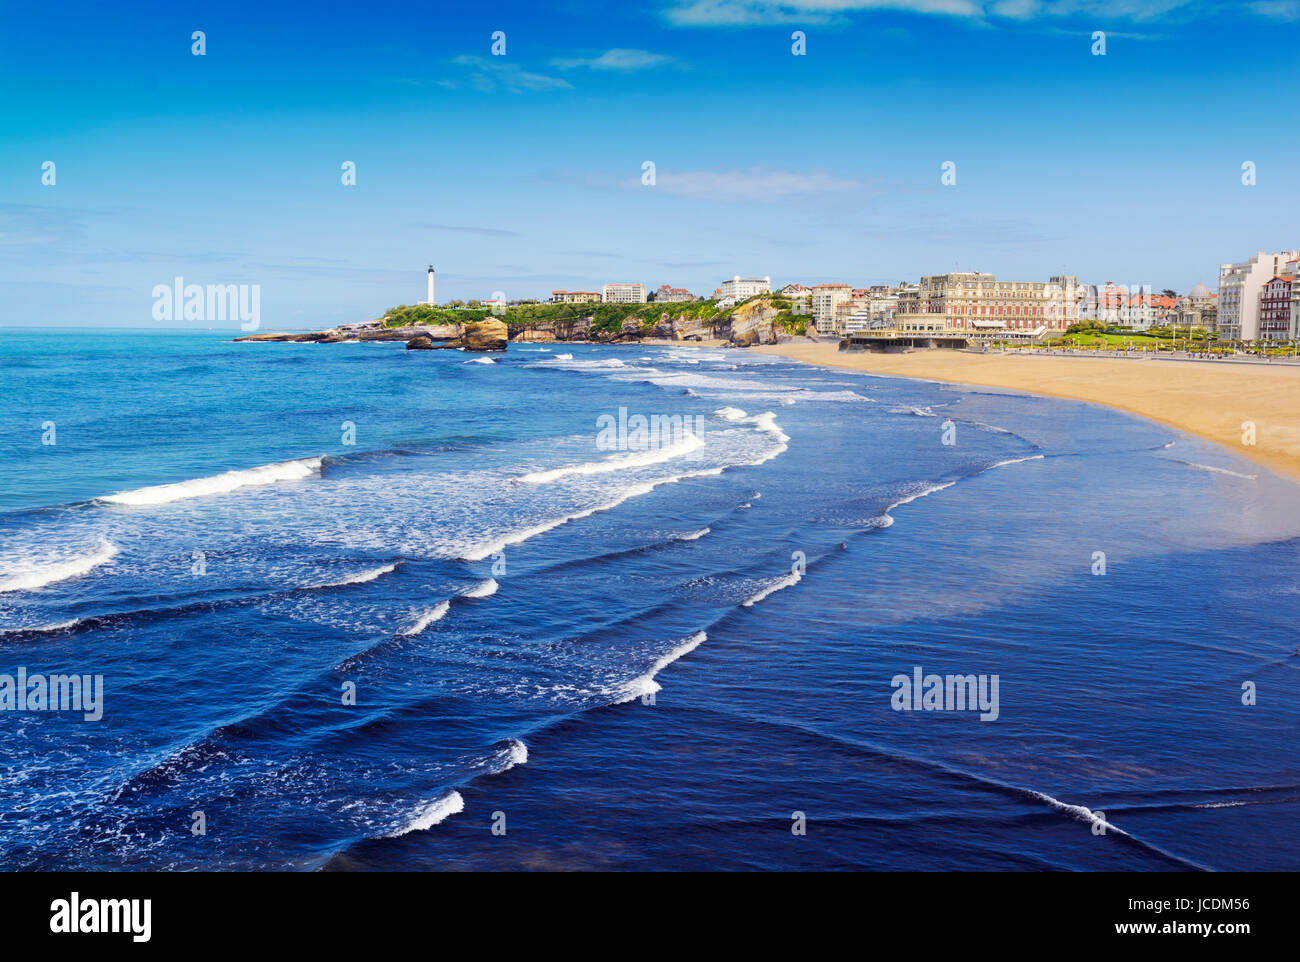 A view of Biarritz city in the south of France during a wonderful sunny day Stock Photo